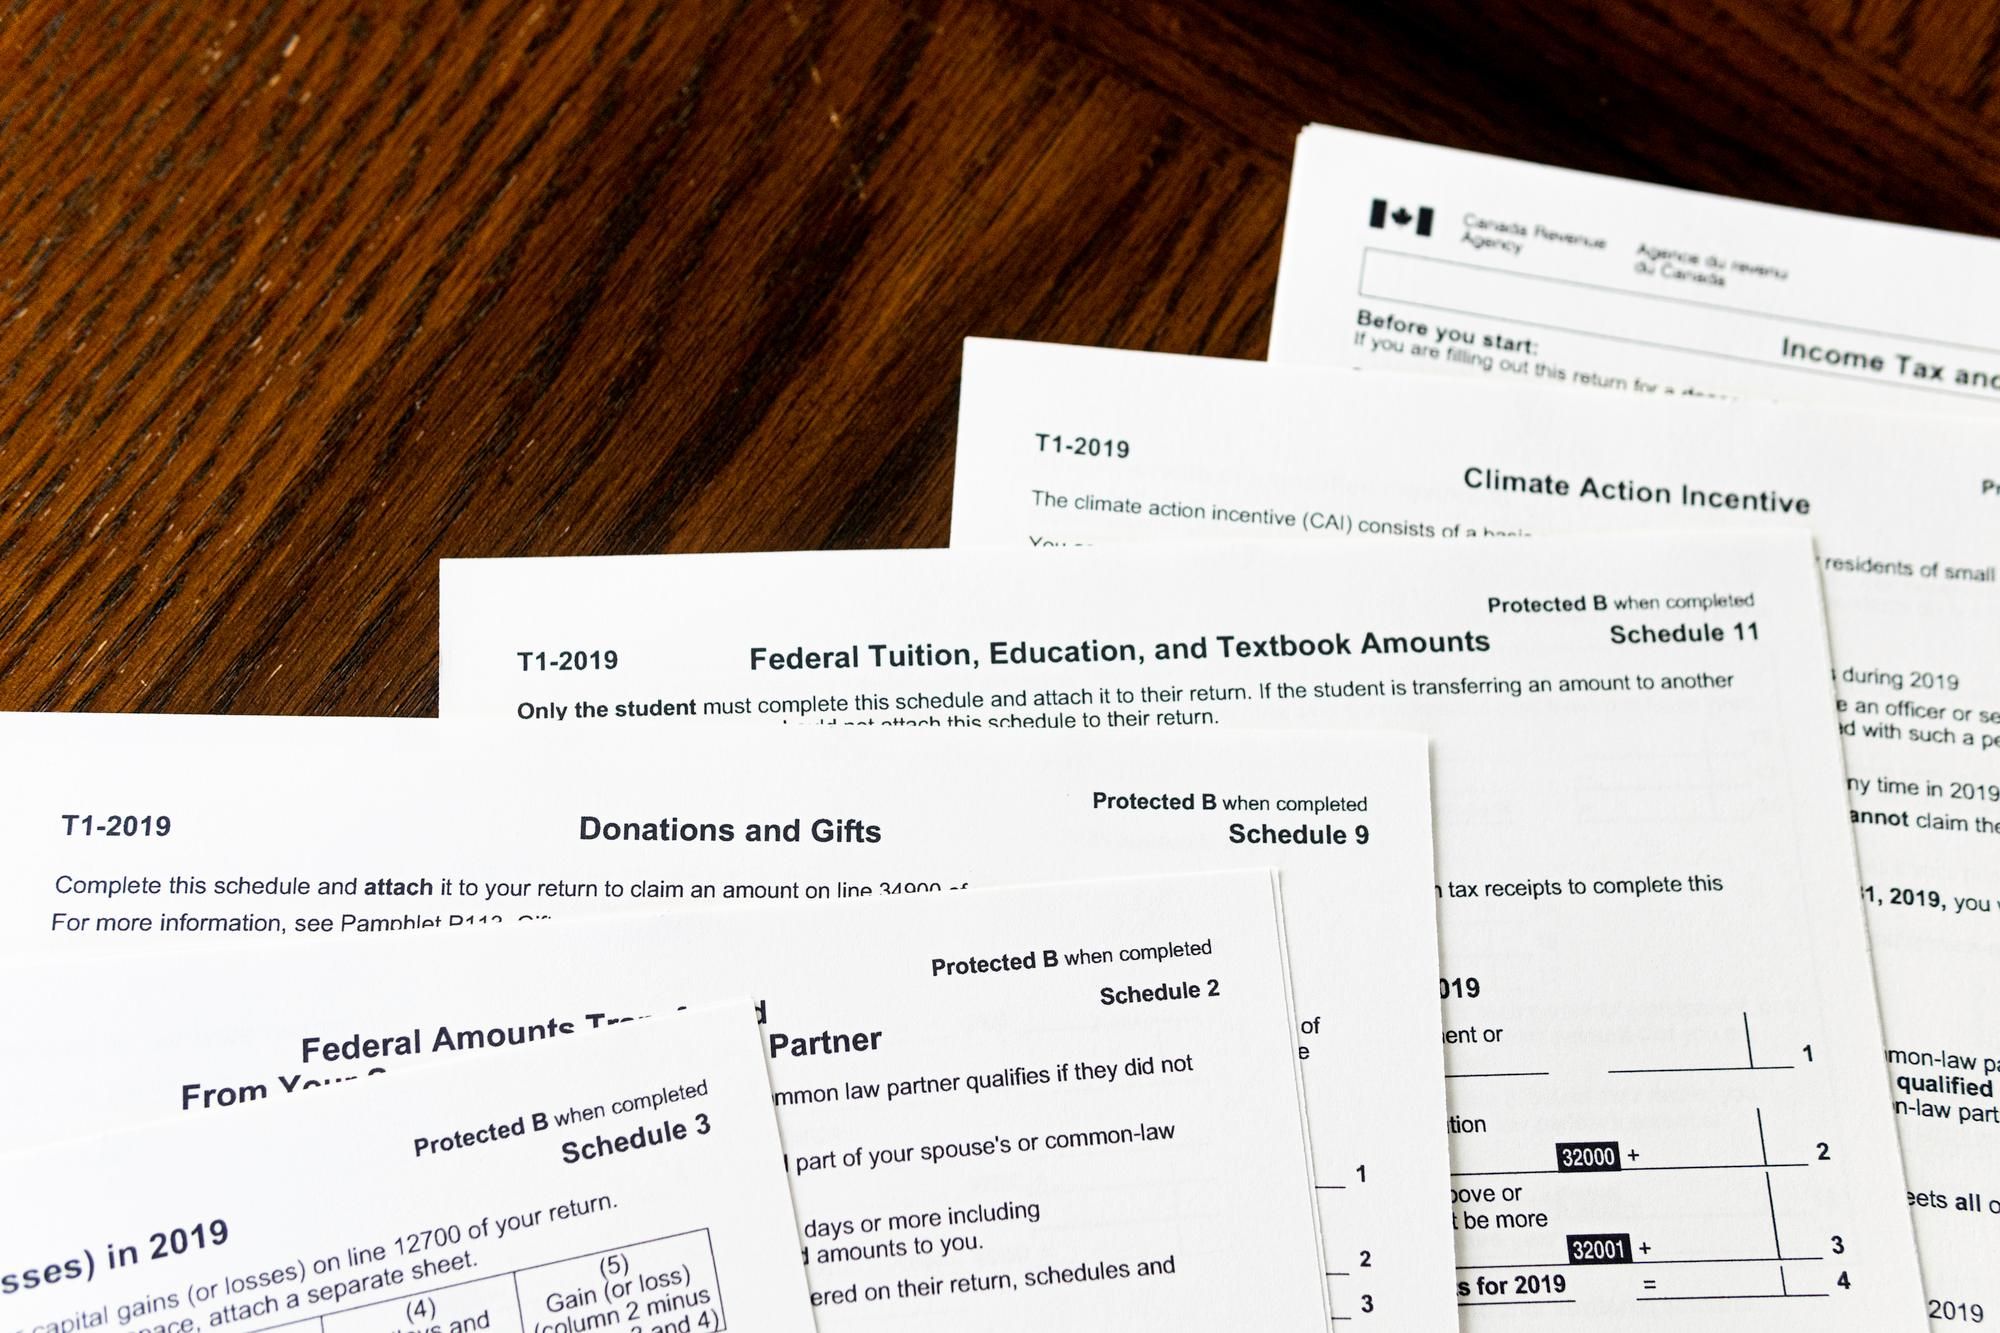 CERB repayment class action lawsuit says revenue agency misinformed self-employed Canadians